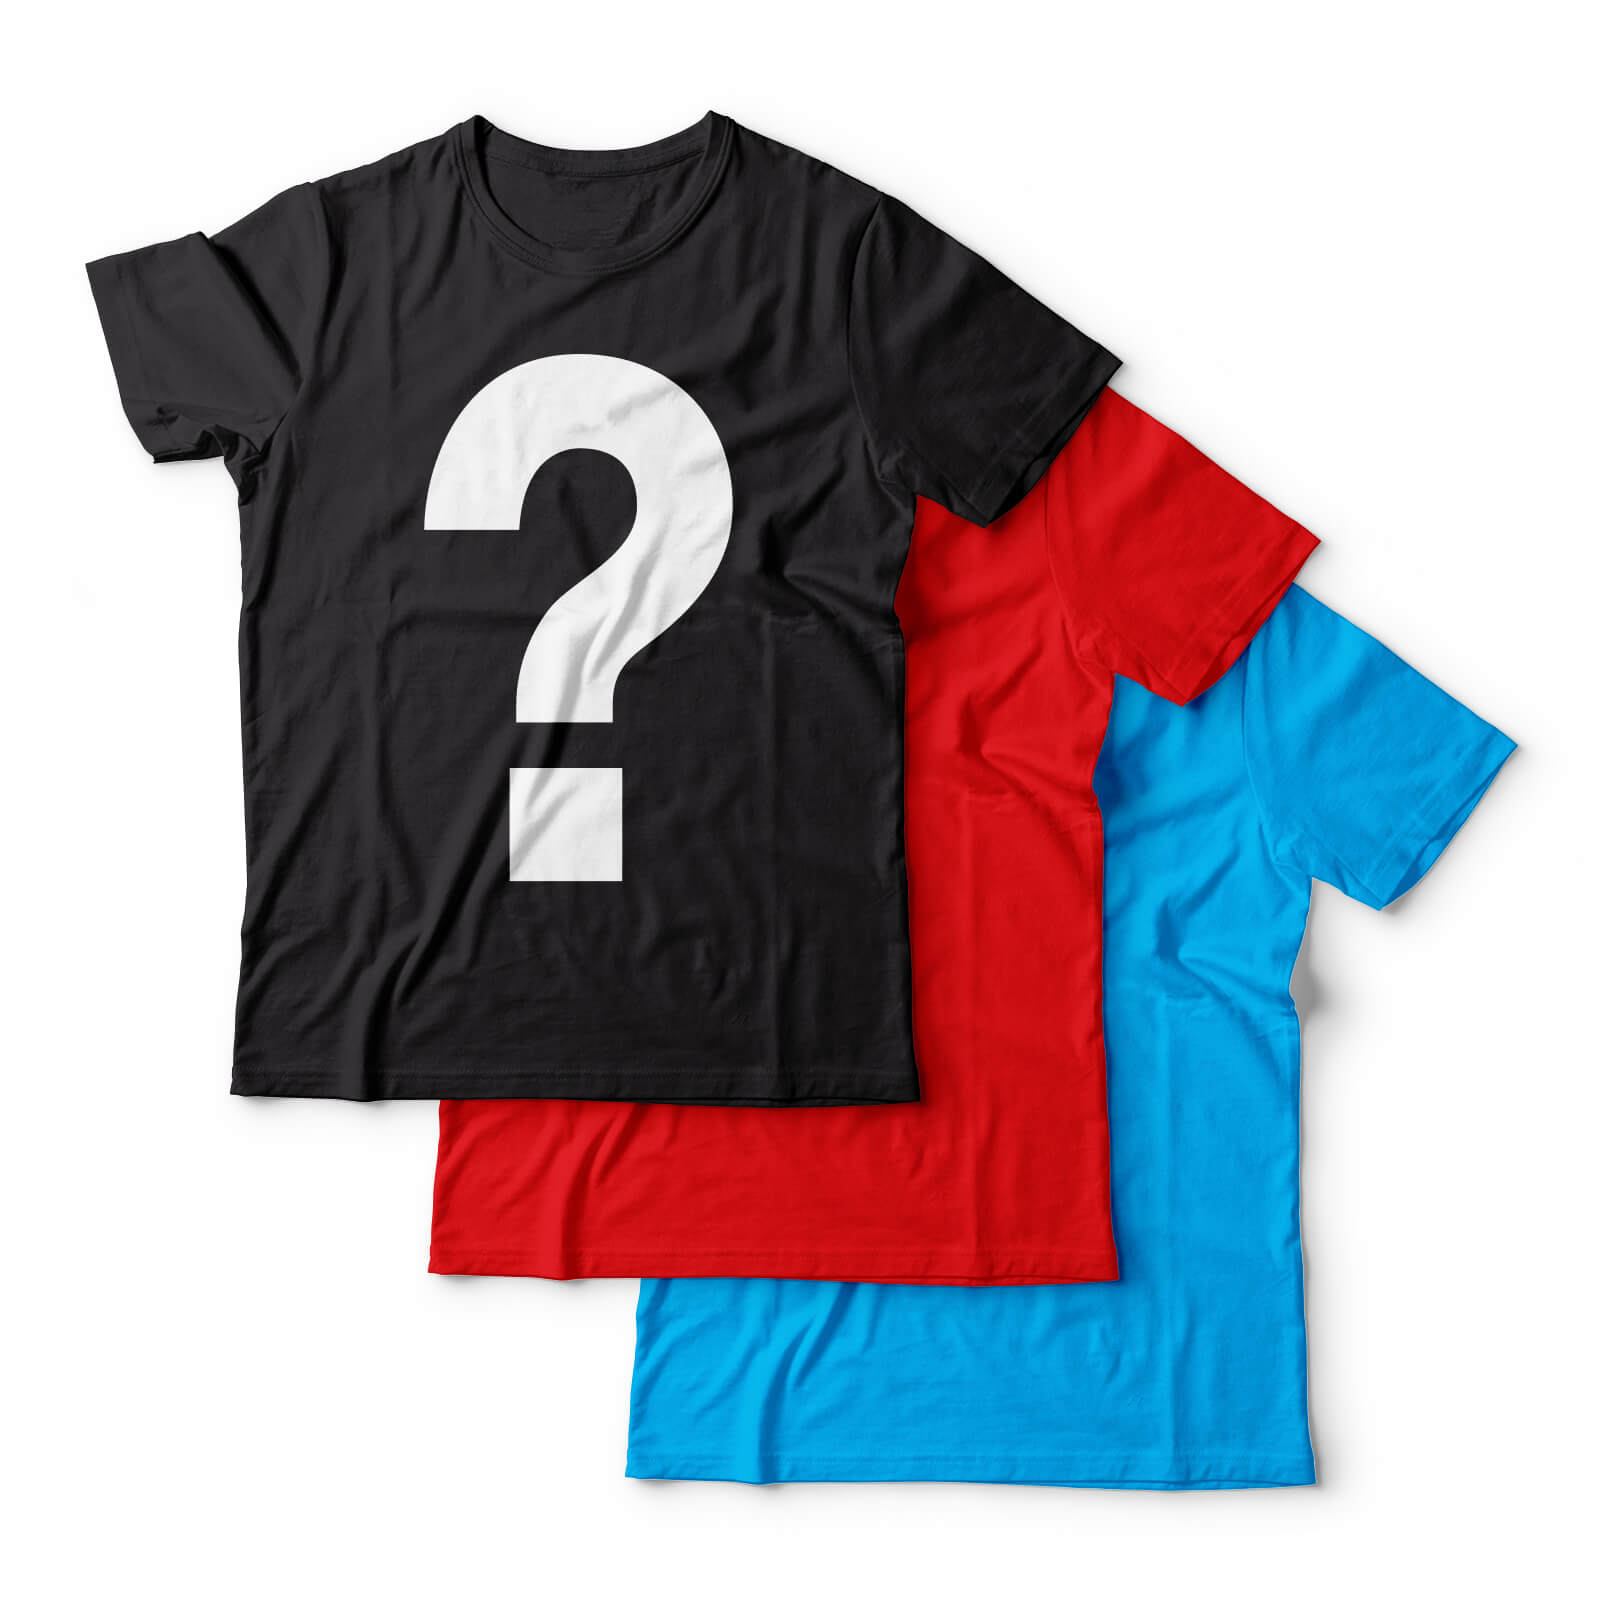 Epic Mystery Geek T-Shirts a 3 Pack - S